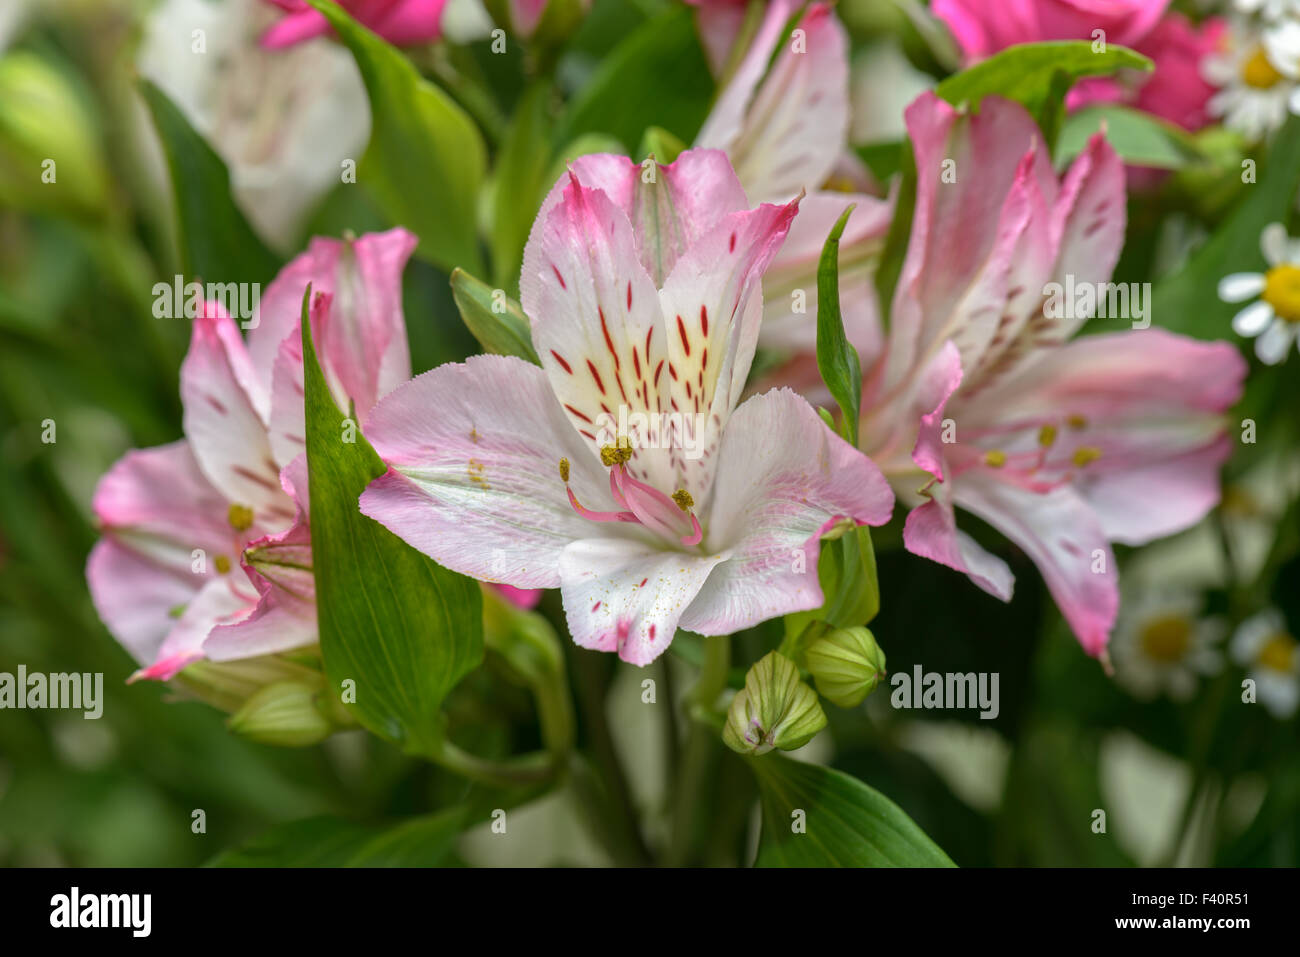 Lily flowers Stock Photo